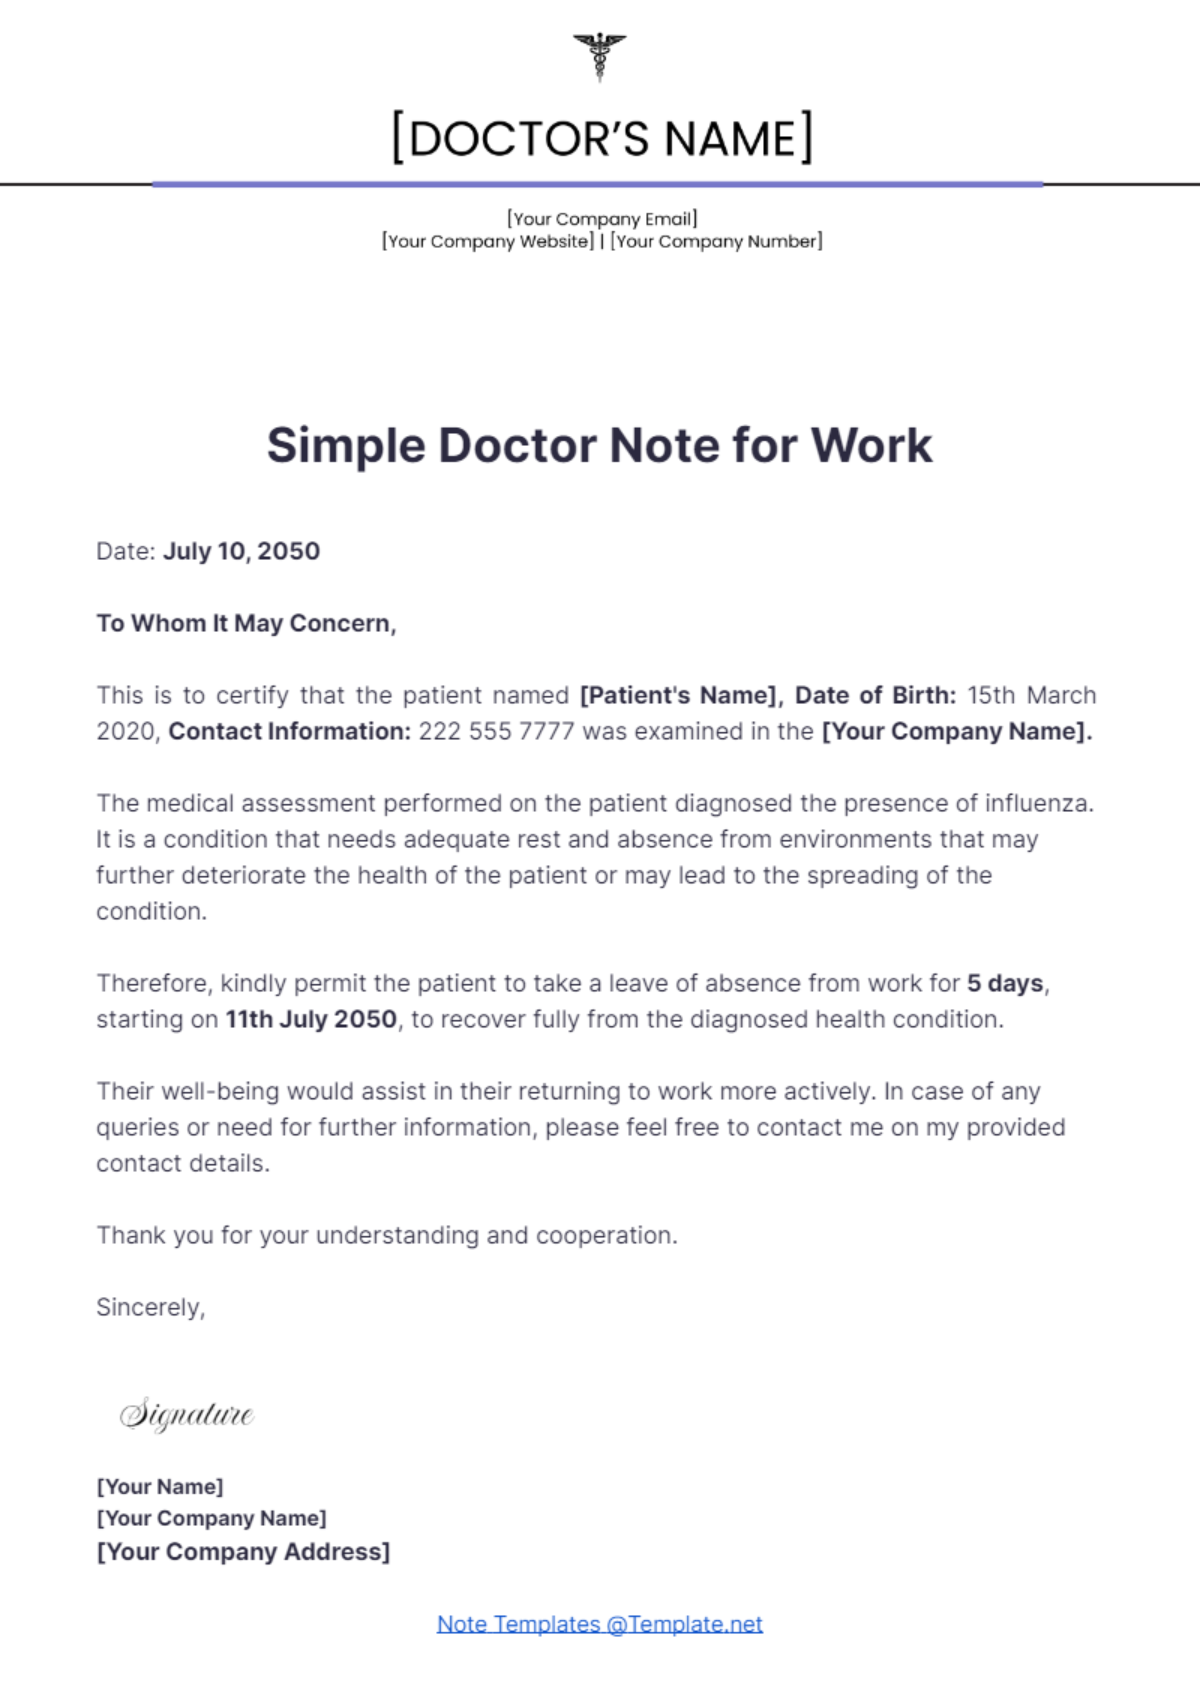 Free Simple Doctor Note For Work Template